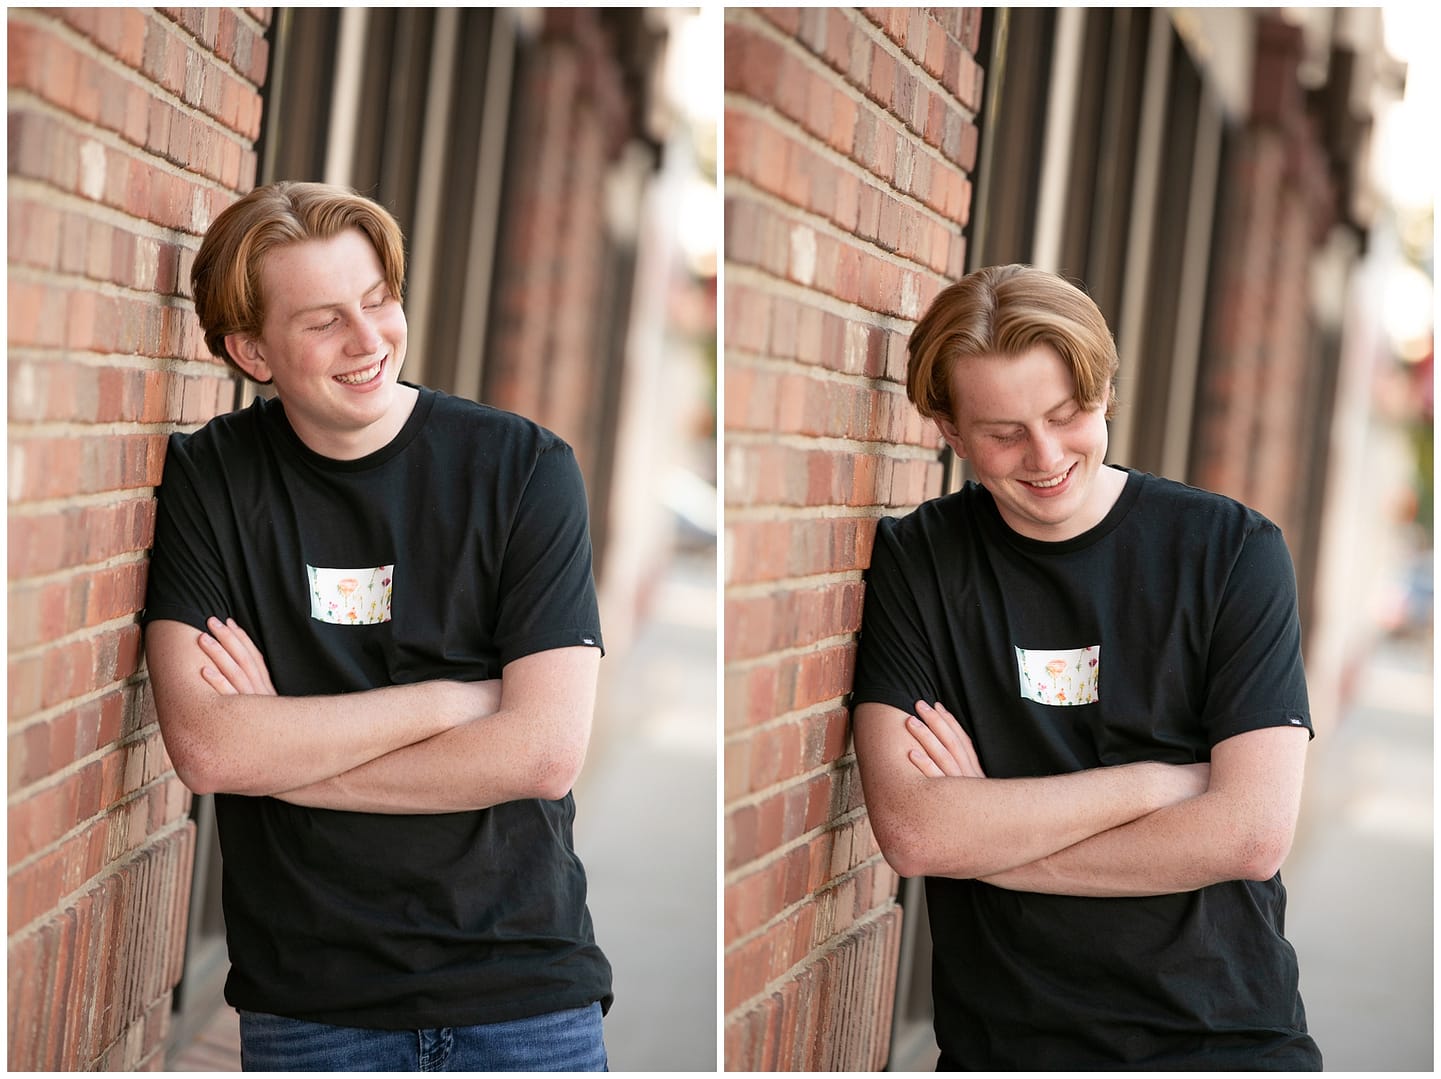 Teenager laughs while getting photo taken. Photos by Tiffany Hix Photography.